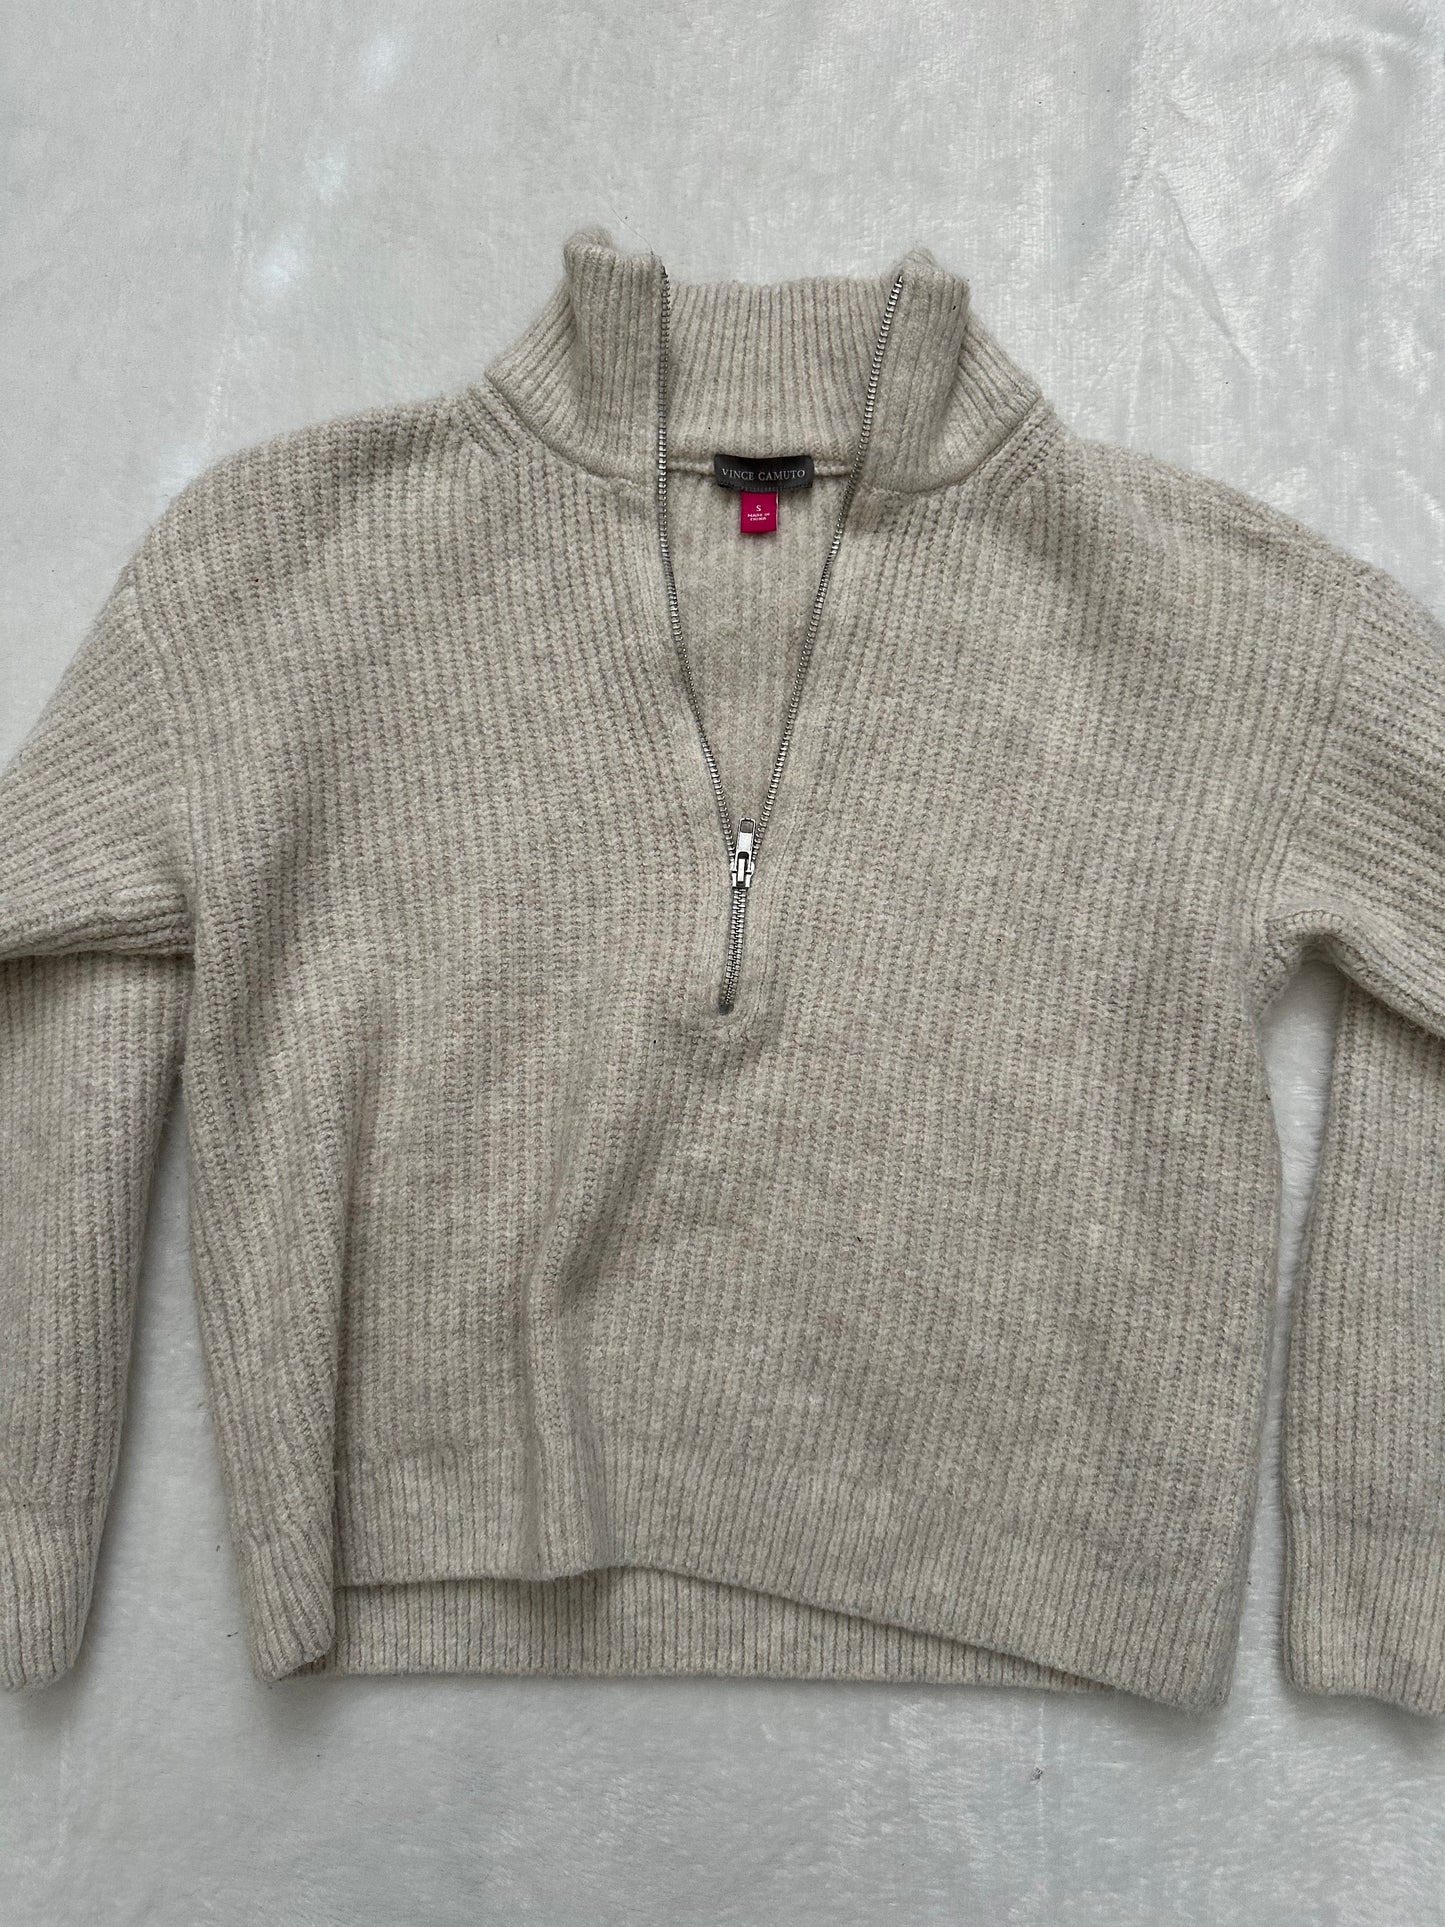 Vince Camuto Ribbed Half Zip Sweater